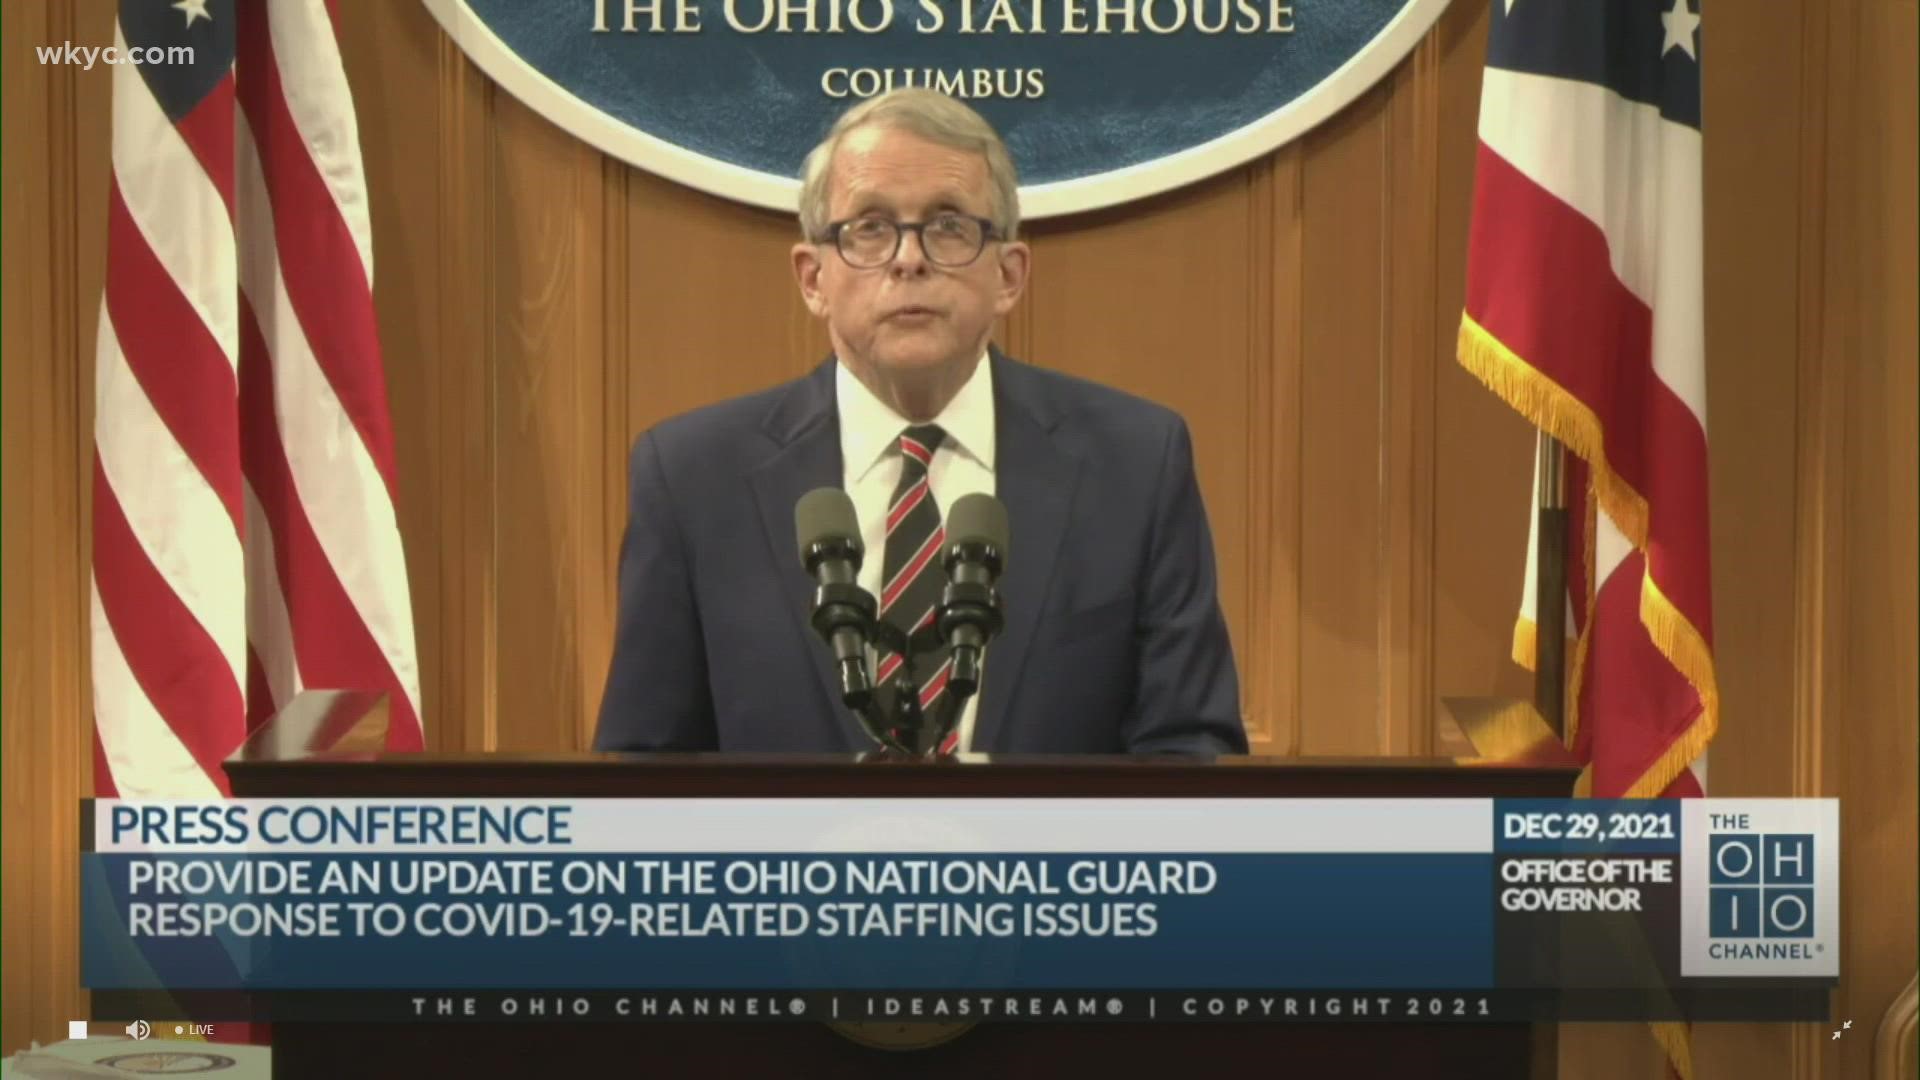 Ohio Governor Mike DeWine is encouraging school districts in the state to adopt mask mandates amid the recent COVID-19 surge.